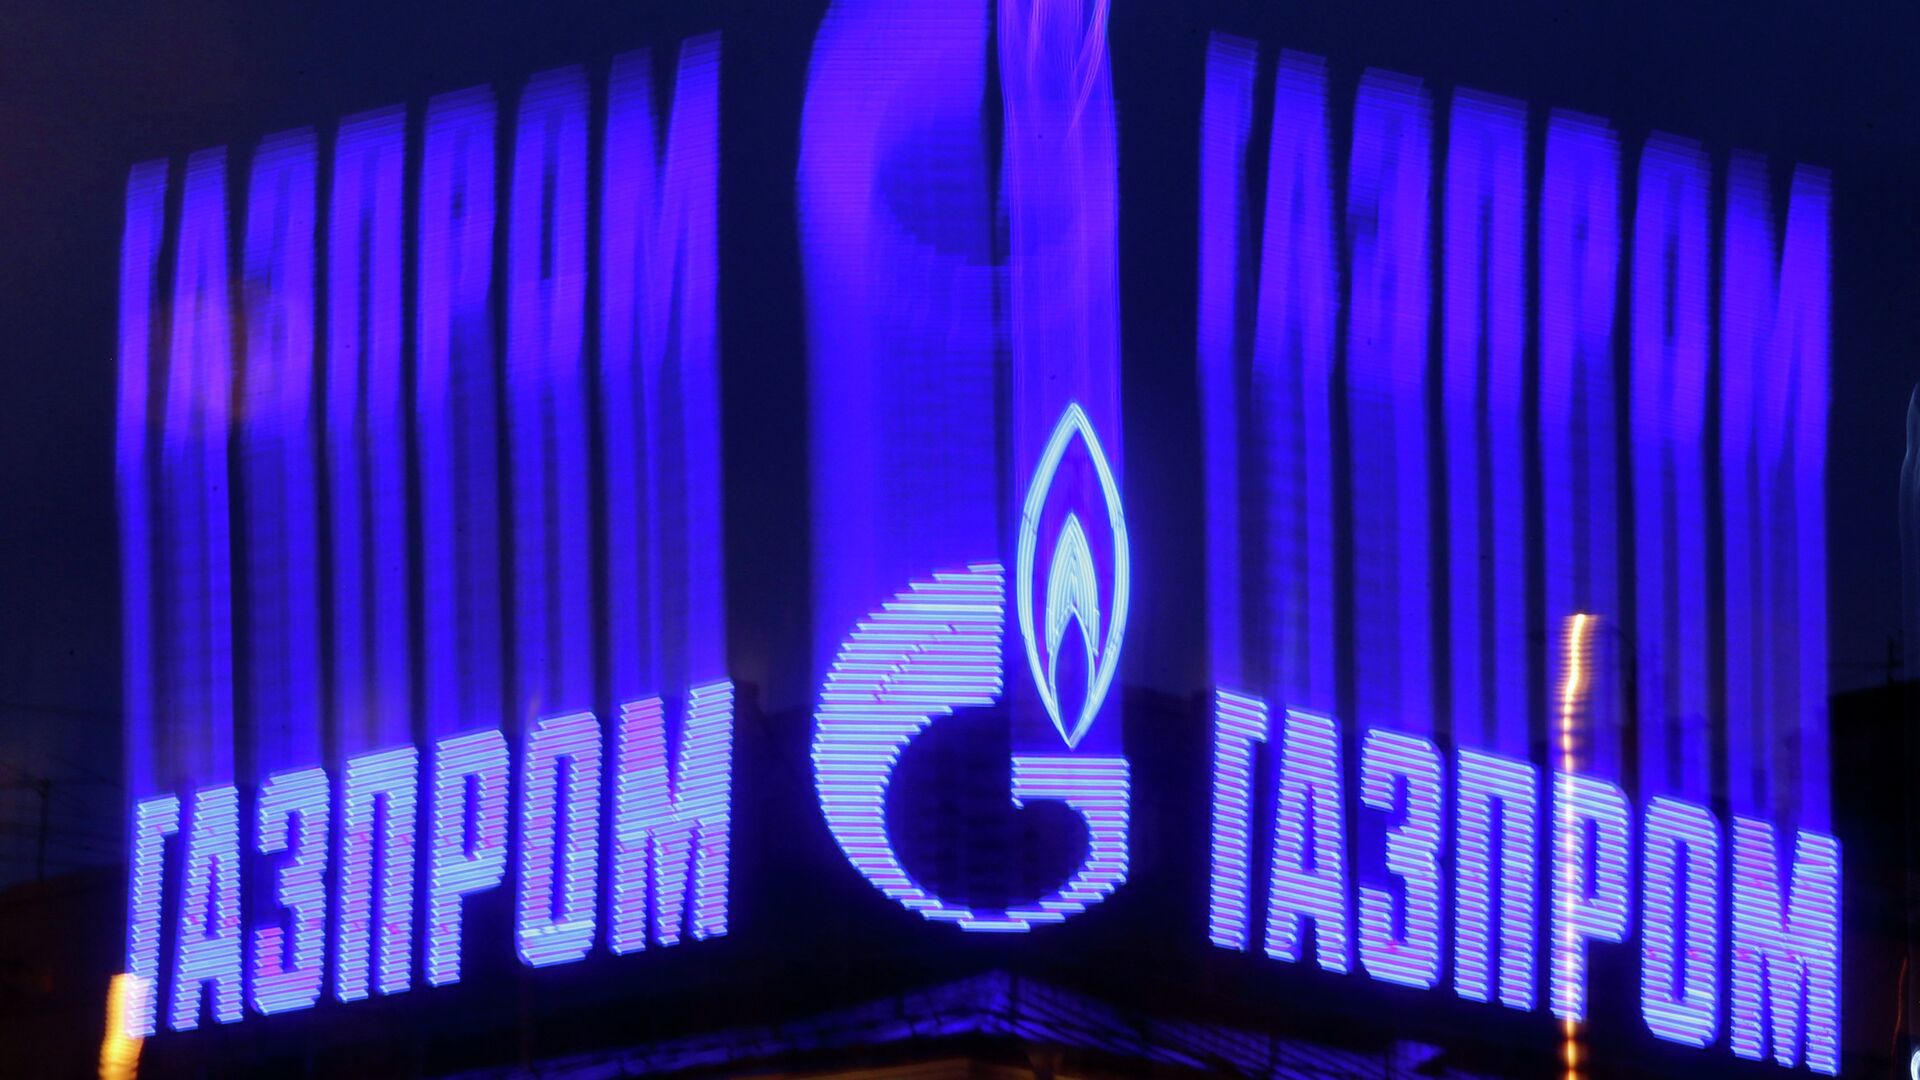 The company logo of Russian natural gas producer Gazprom is seen on an advertisement installed on the roof of a building in St. Petersburg - Sputnik Mundo, 1920, 14.01.2022